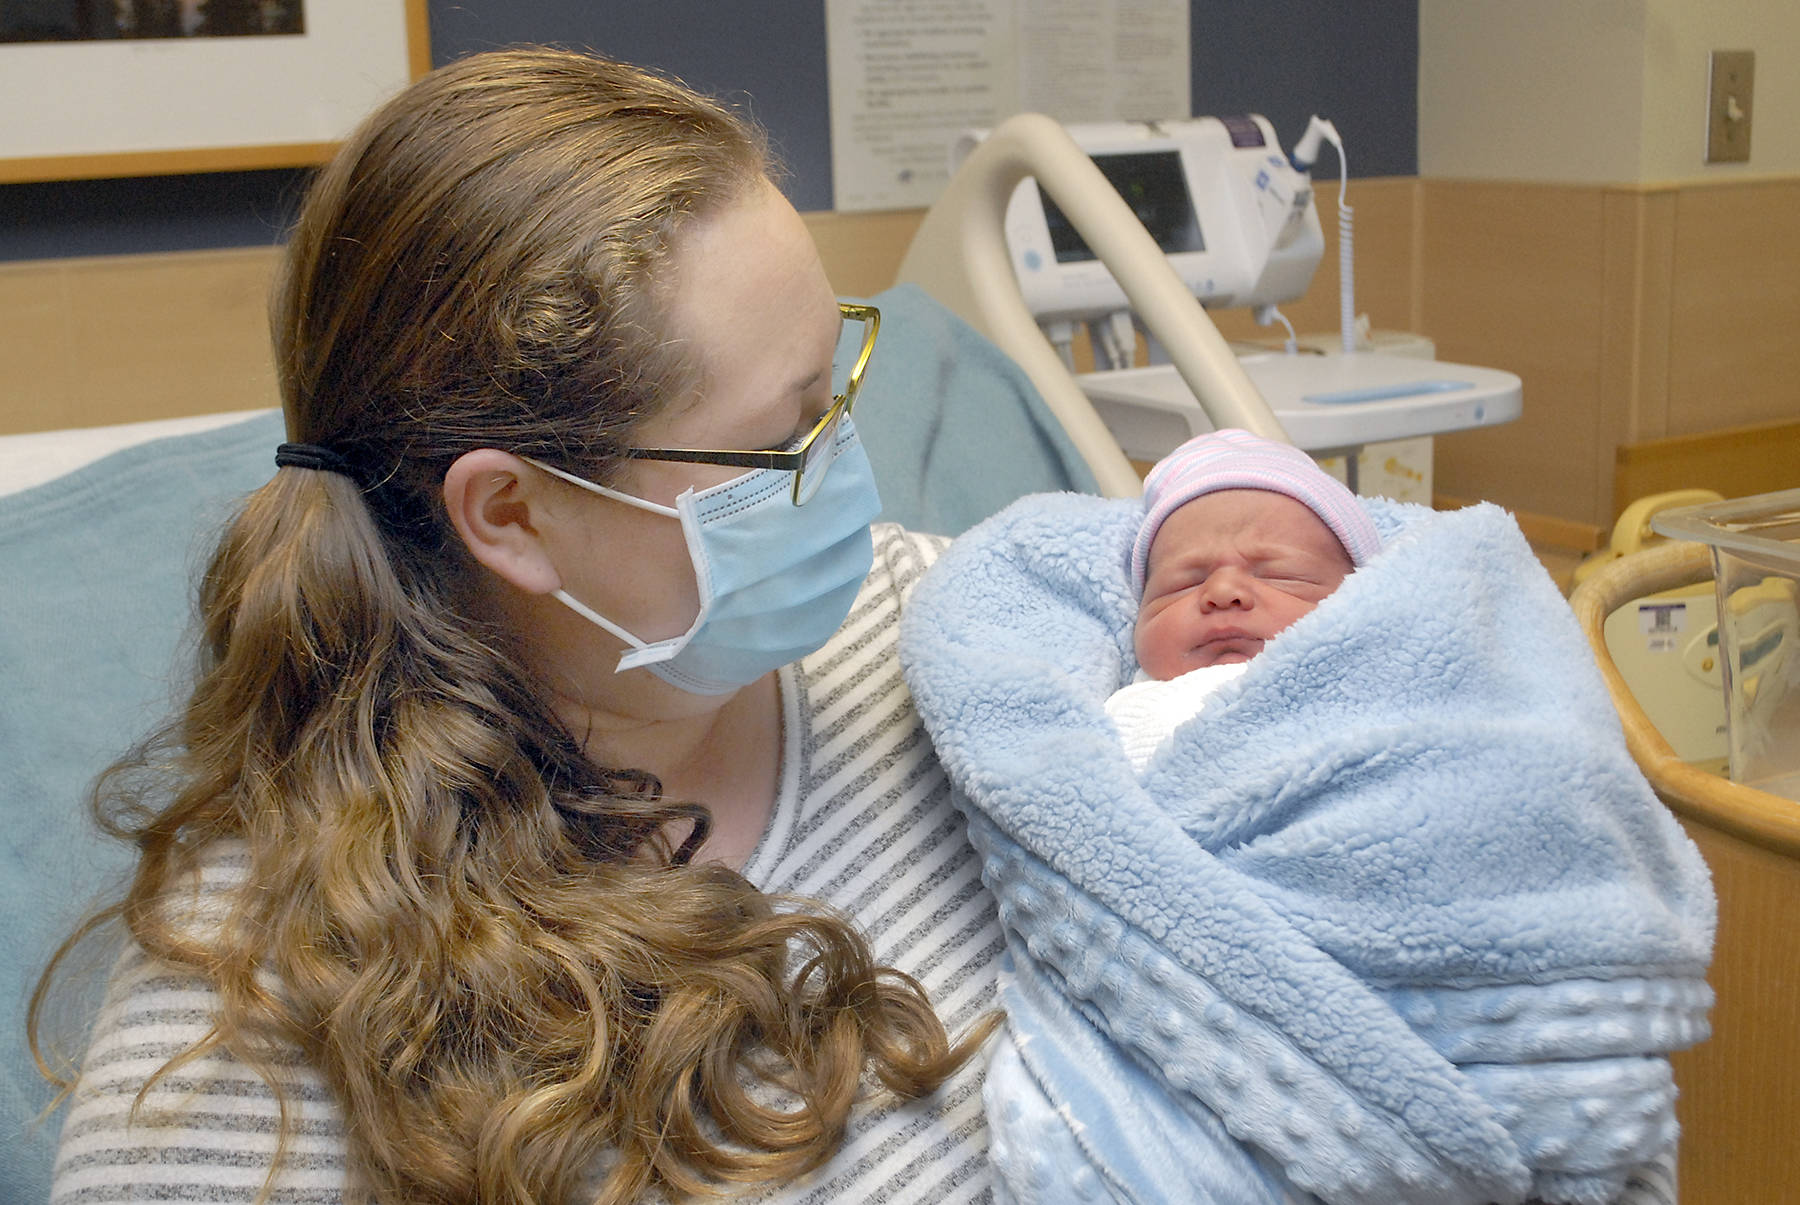 Keith Thorpe/Peninsula Daily News
Kaitlyn Loghry of Forks looks at her son, Ethan Scott Loghry, at Olympic Medical Center. The baby is named for his father, Scott Loghry, and grandfather.